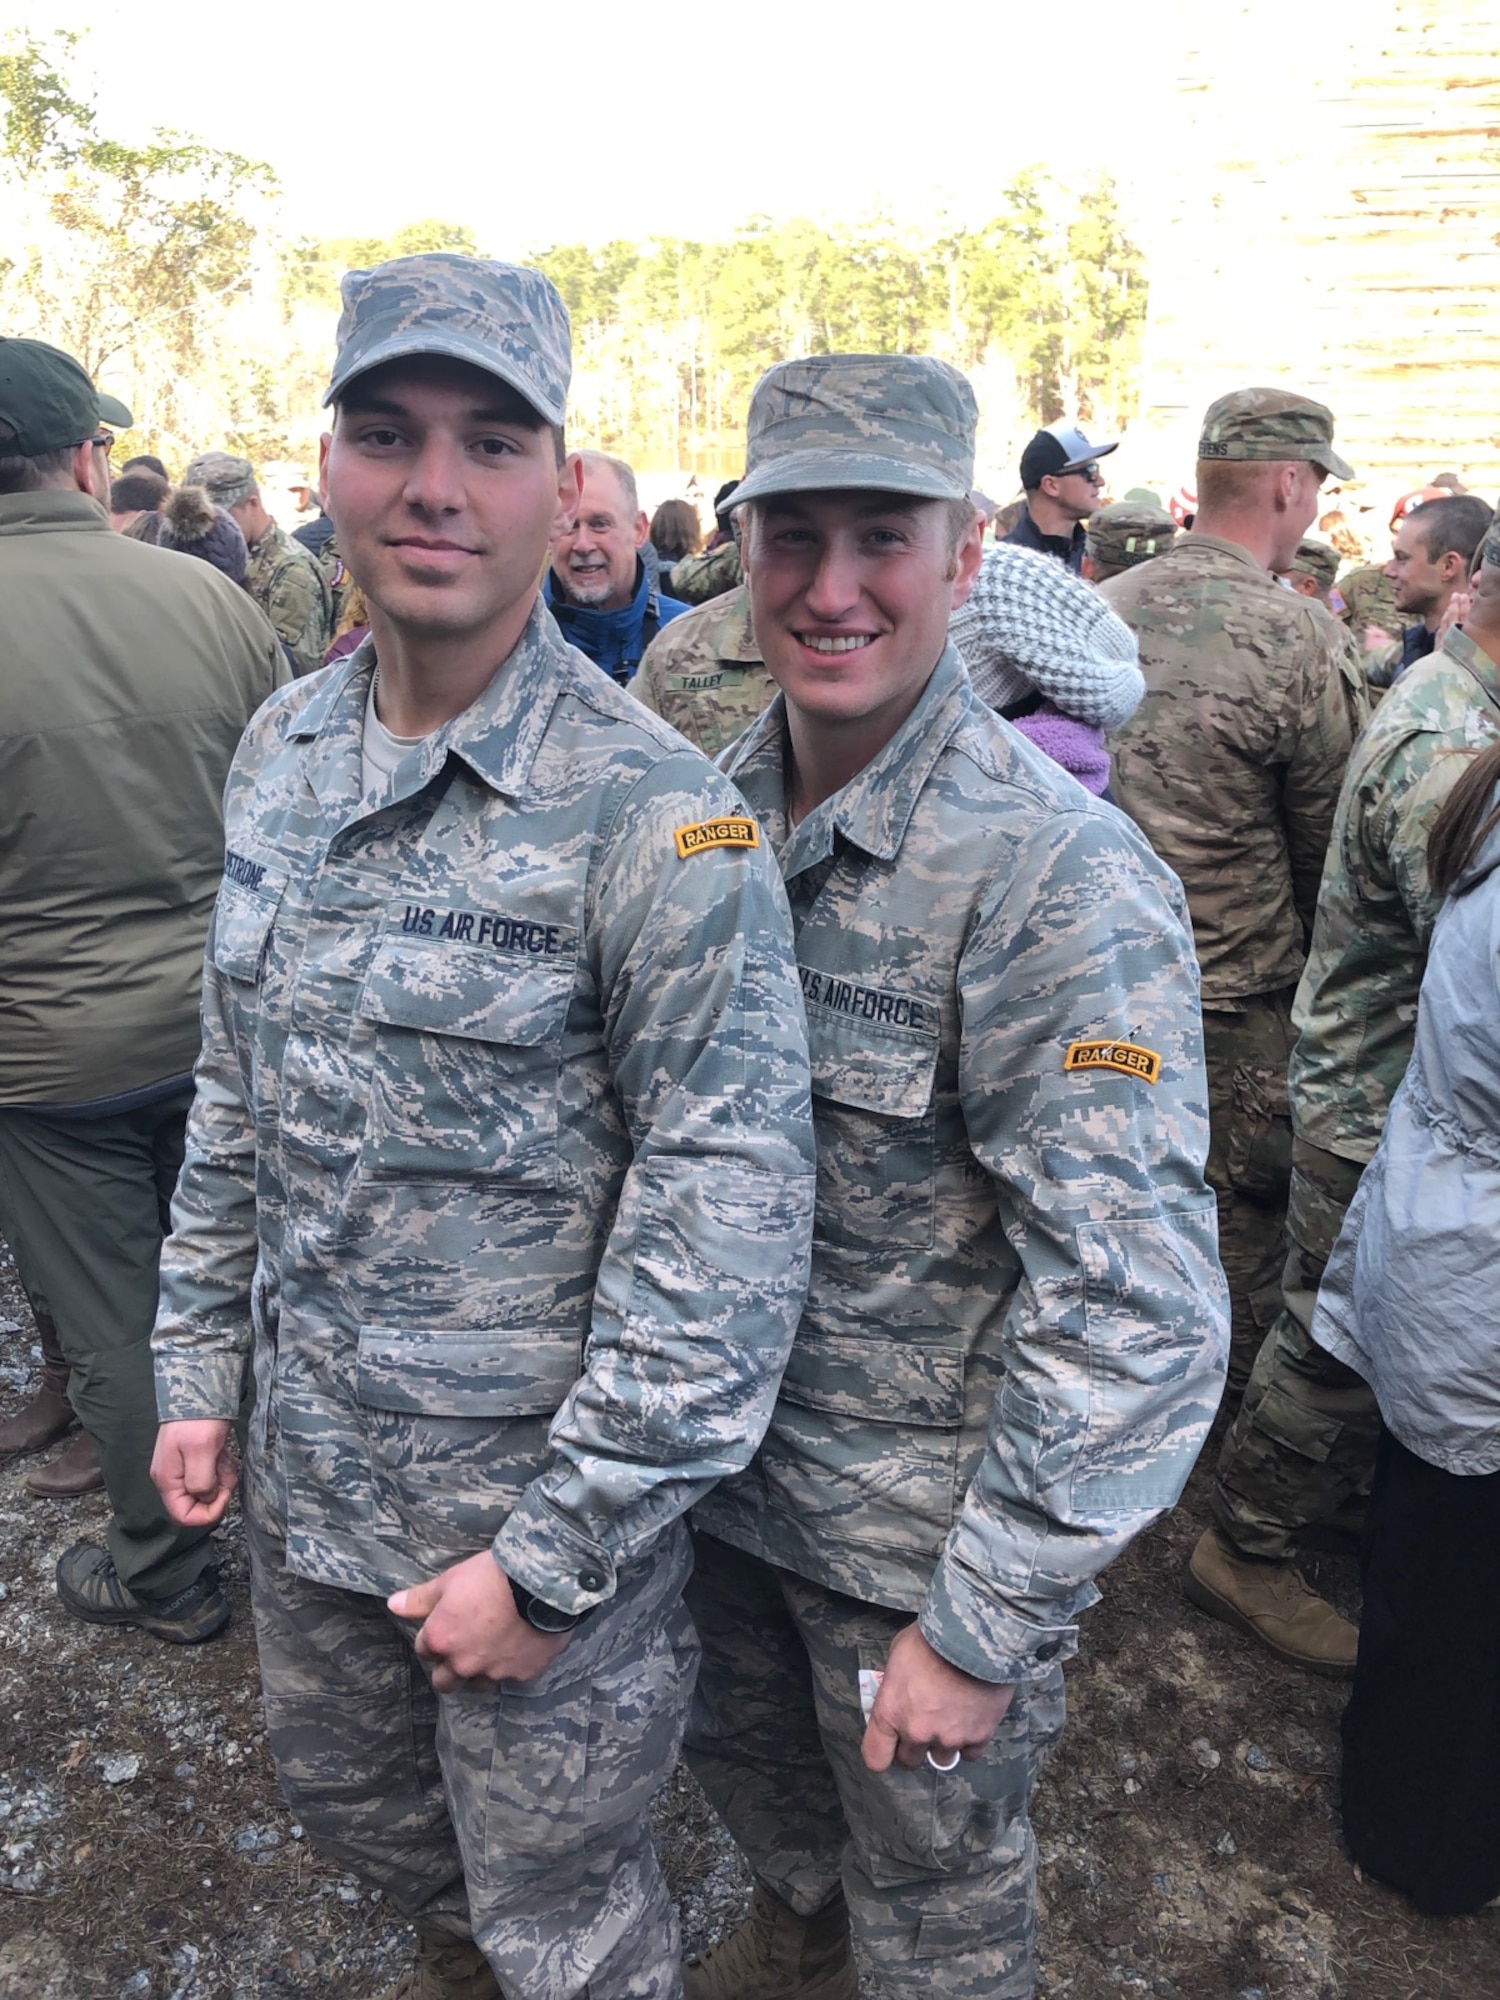 U.S. Air Force Staff Sgt. Joseph Petrone, 83rd Network Operations Squadron plans and programs manager, and Senior Airman Jordan Ryan, 633rd Security Forces Squadron unit scheduler, earn their Ranger Tab from the United States Army Ranger School at Fort Benning, Georgia, Jan. 25, 2019.